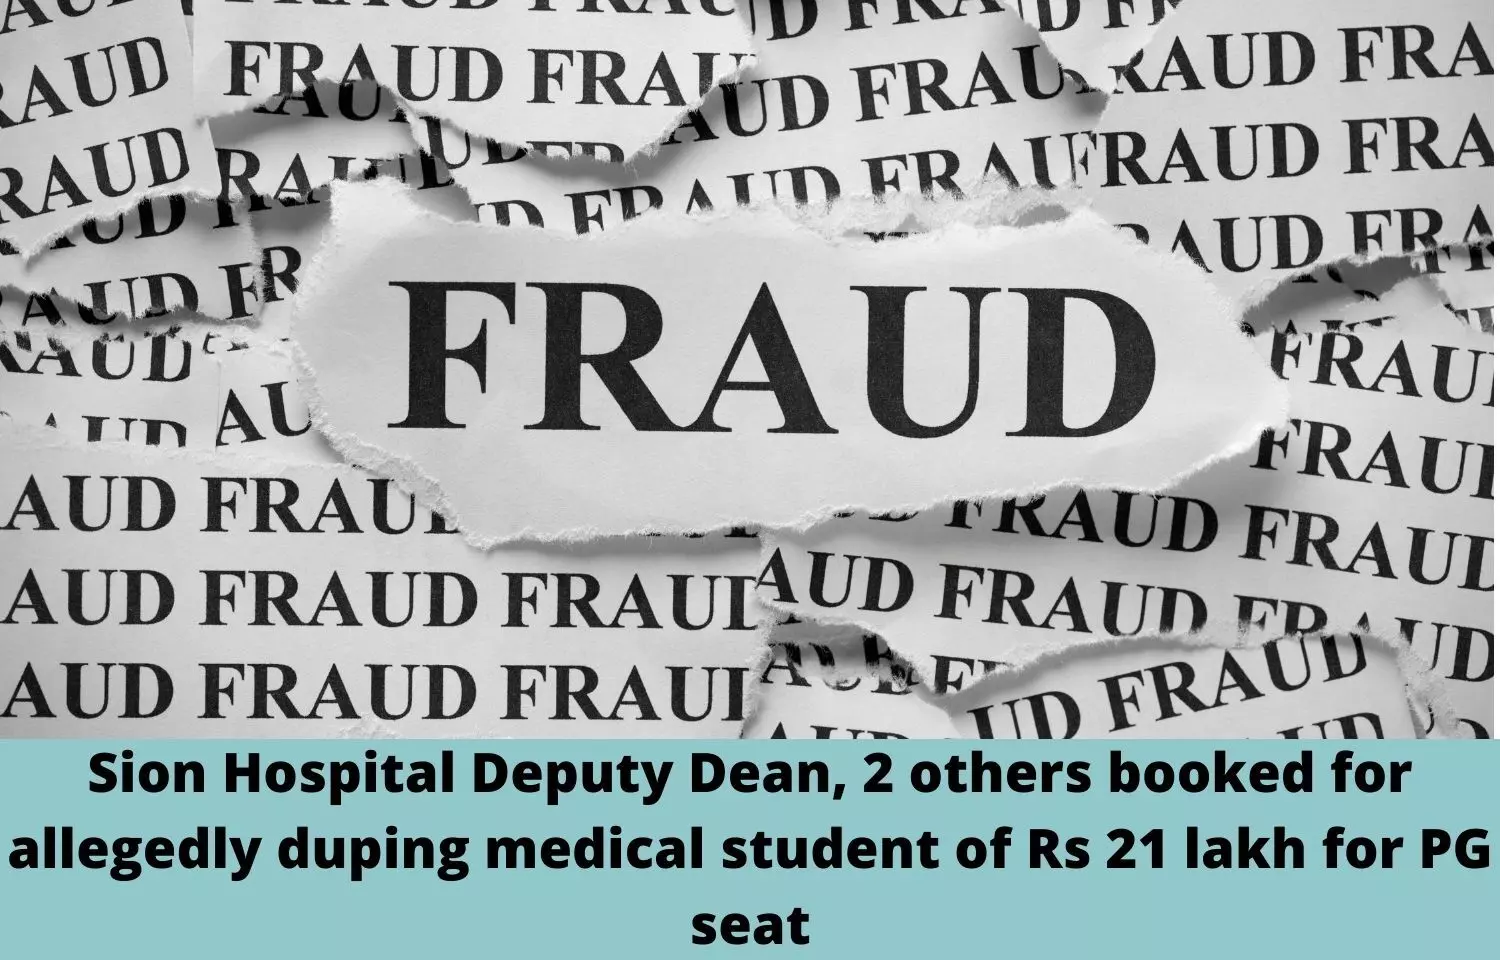 Sion Hospital Deputy Dean, 2 others booked for allegedly duping medical student of Rs 21 lakh for PG seat